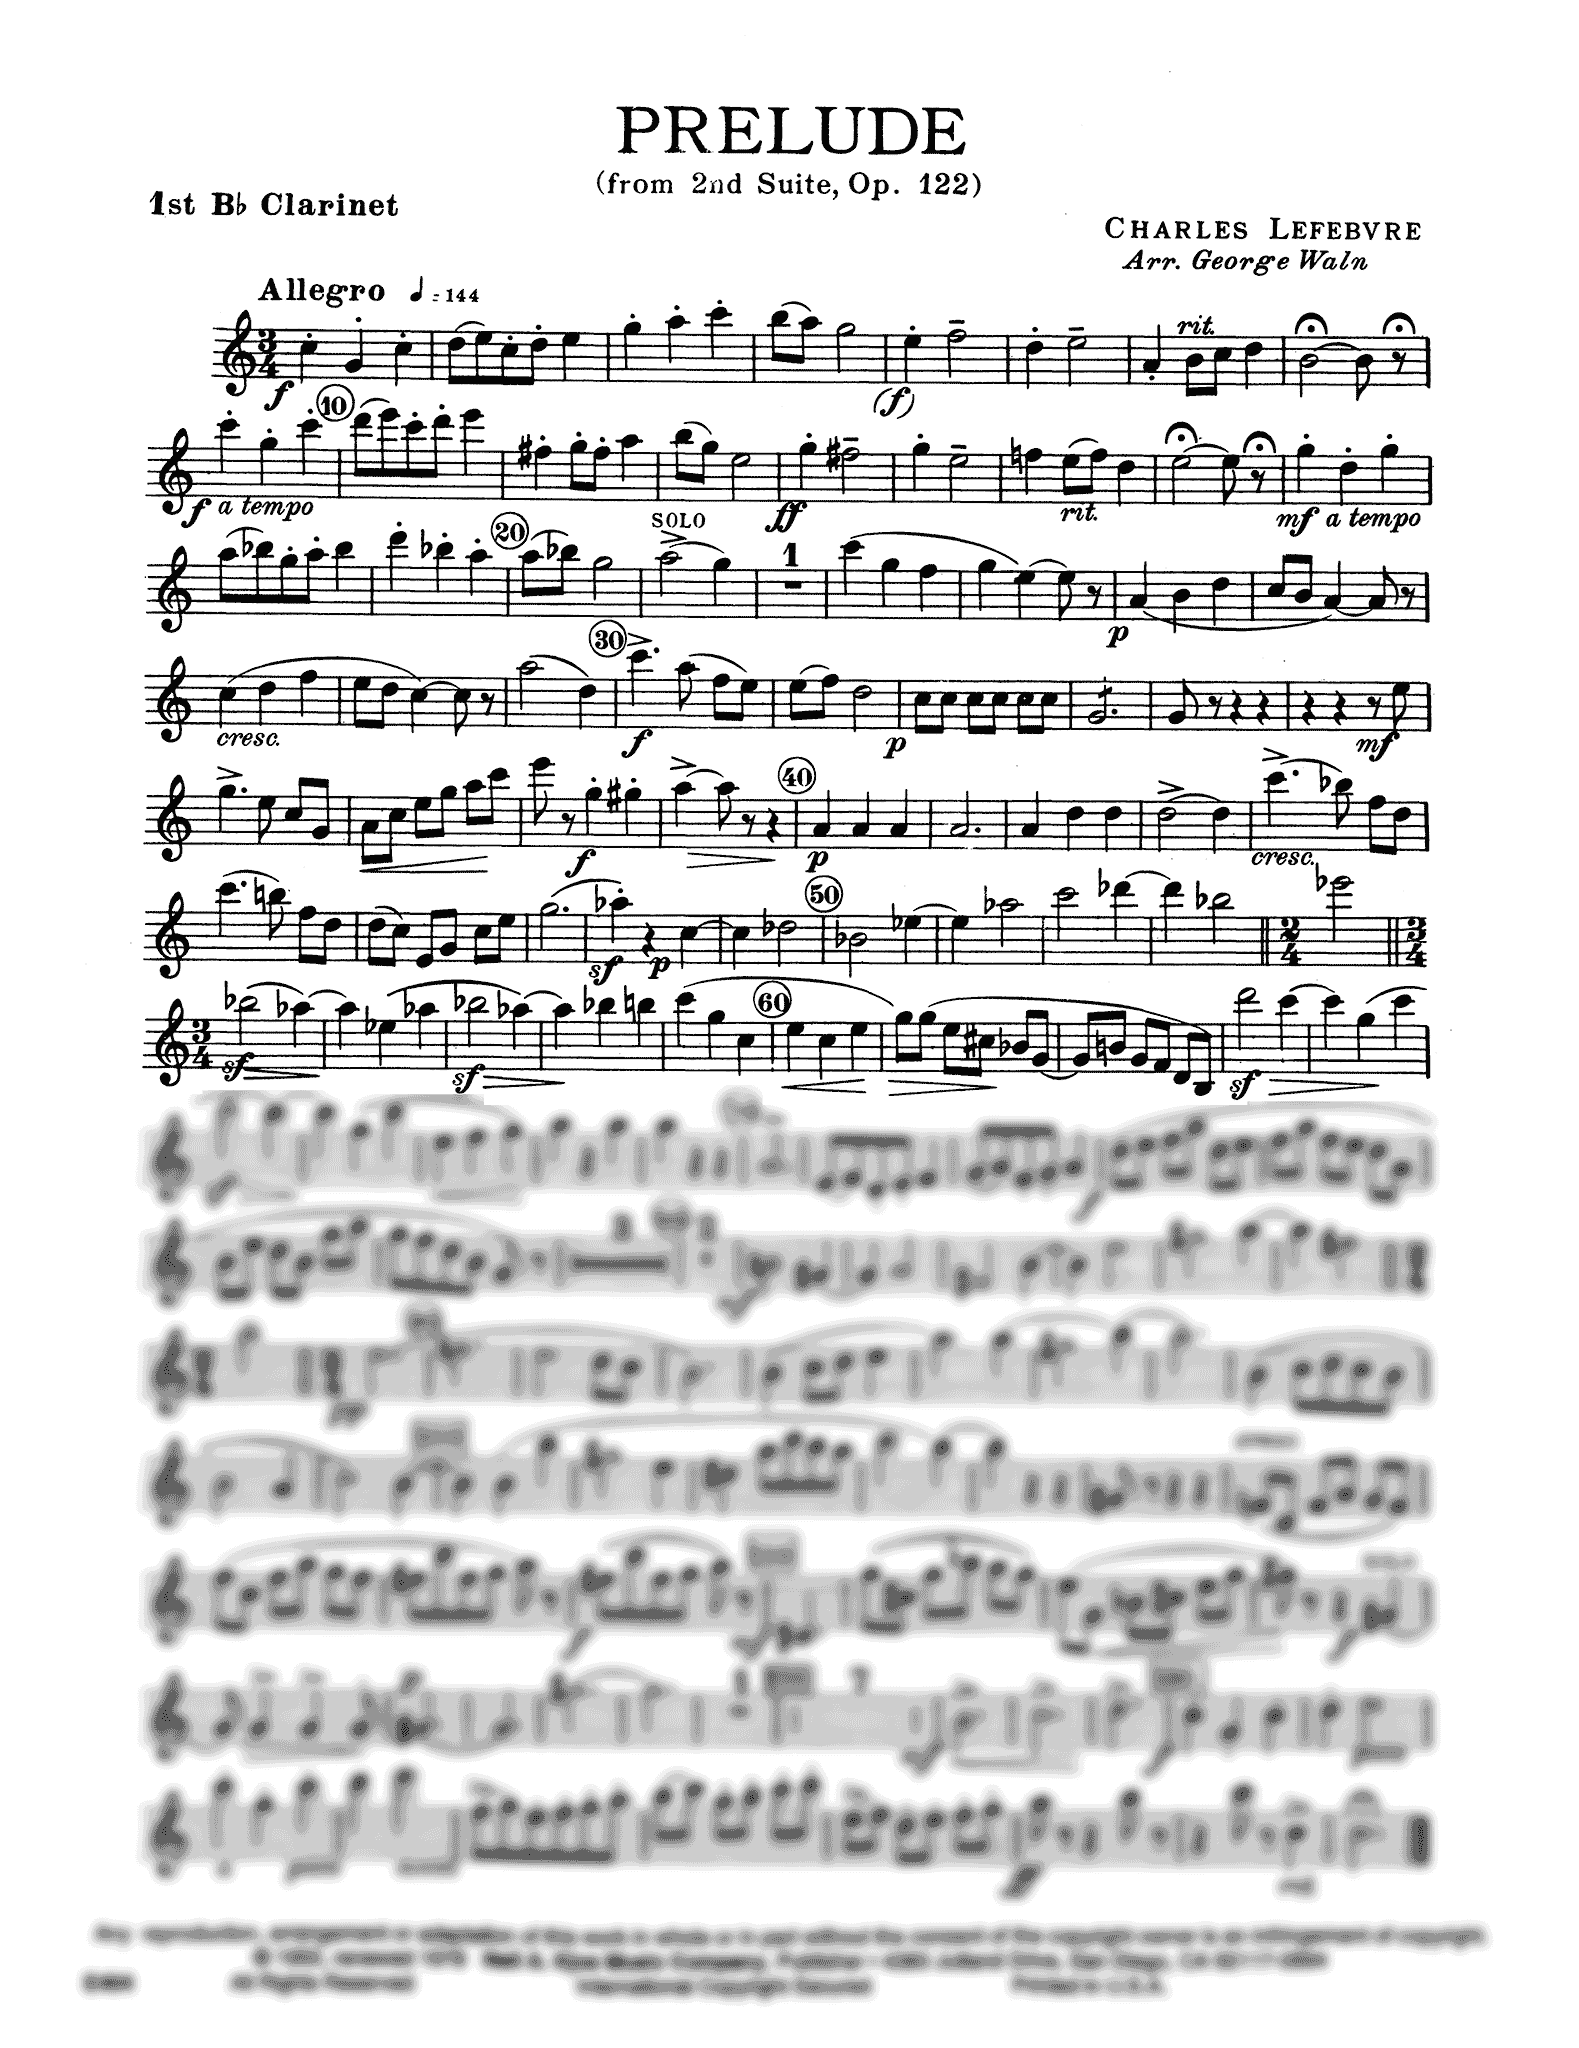 Prelude, from Suite for Winds No. 2, Op. 122 First Clarinet part